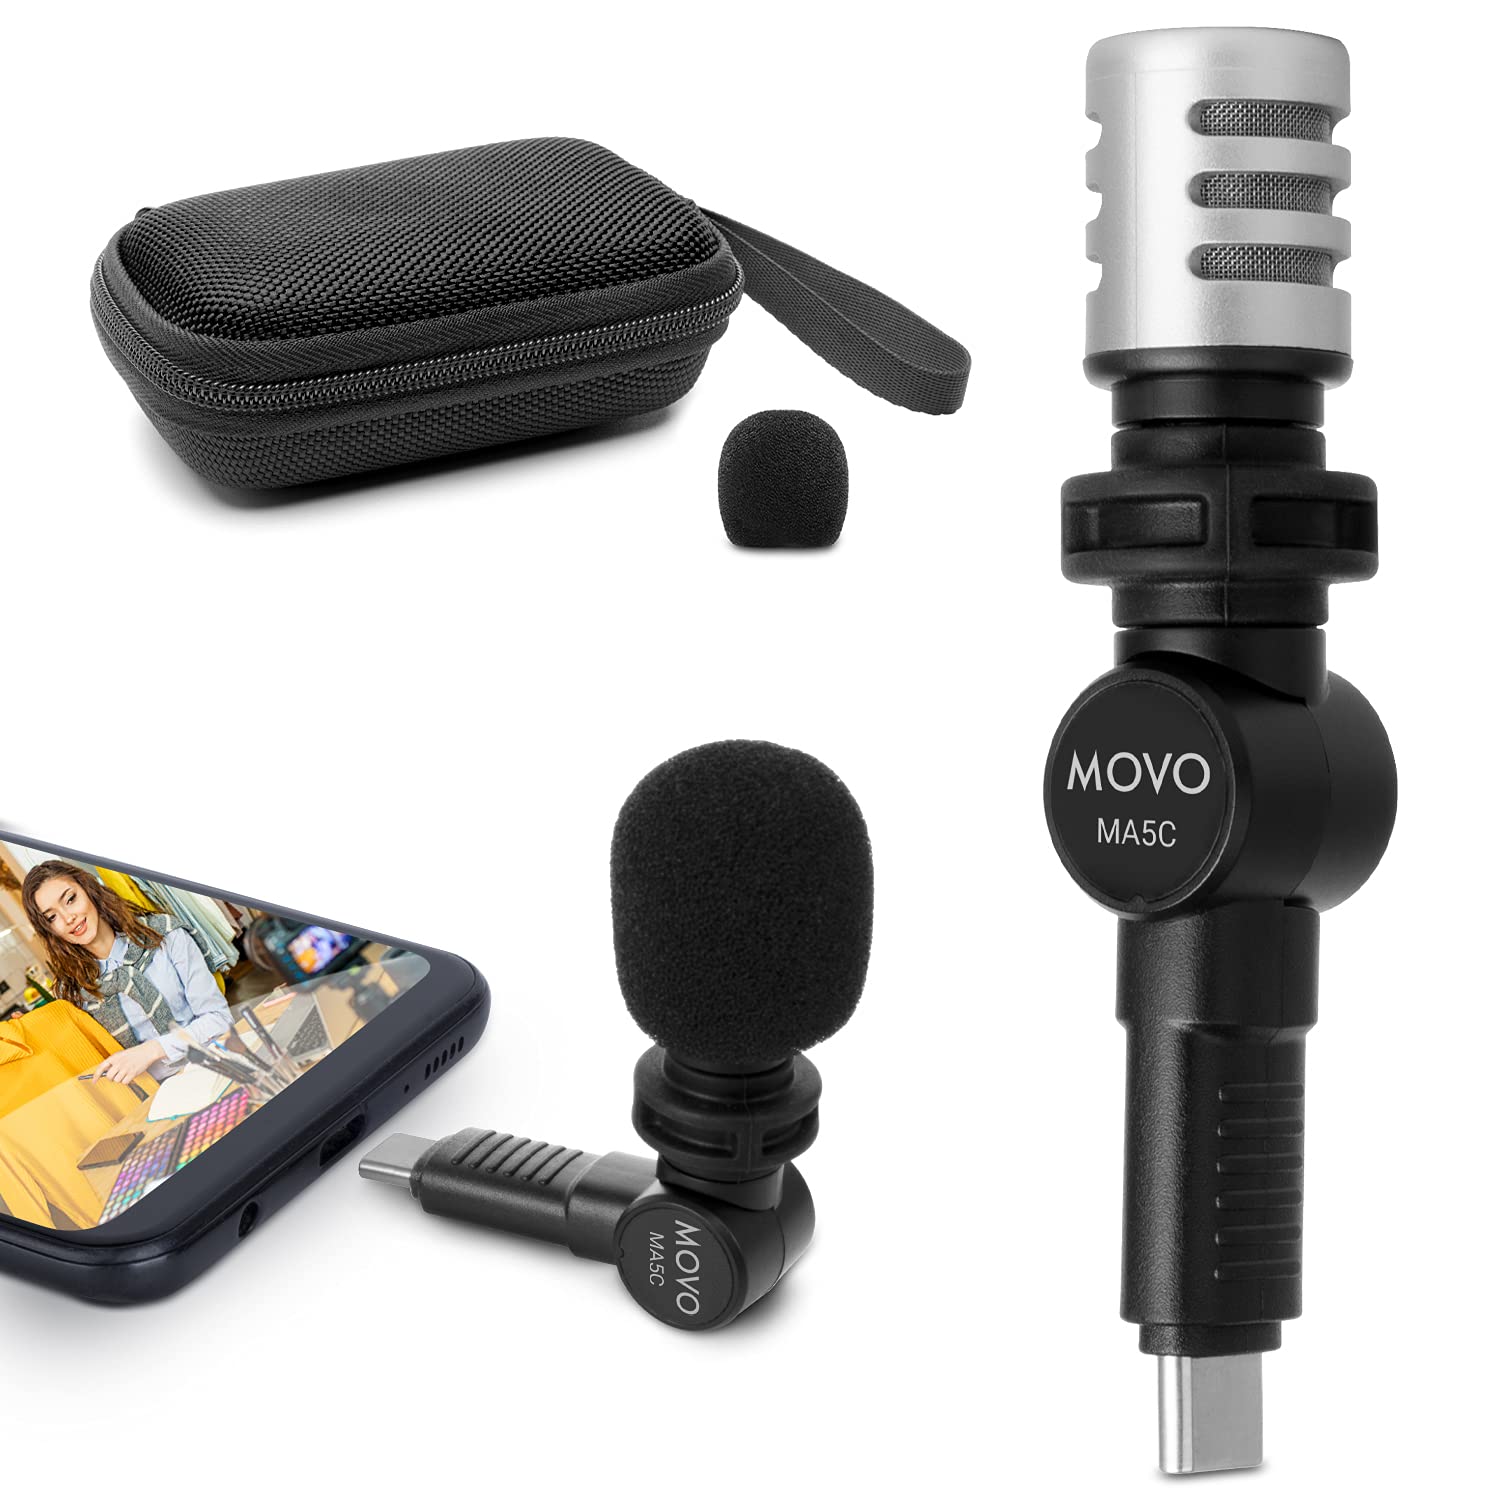 Movo MA5C External USB C Microphone for Type-C Devices - Condenser Shotgun Mic for Video Recording, Voiceover, Interview, Travel, Vlogging, Youtube  - Like New